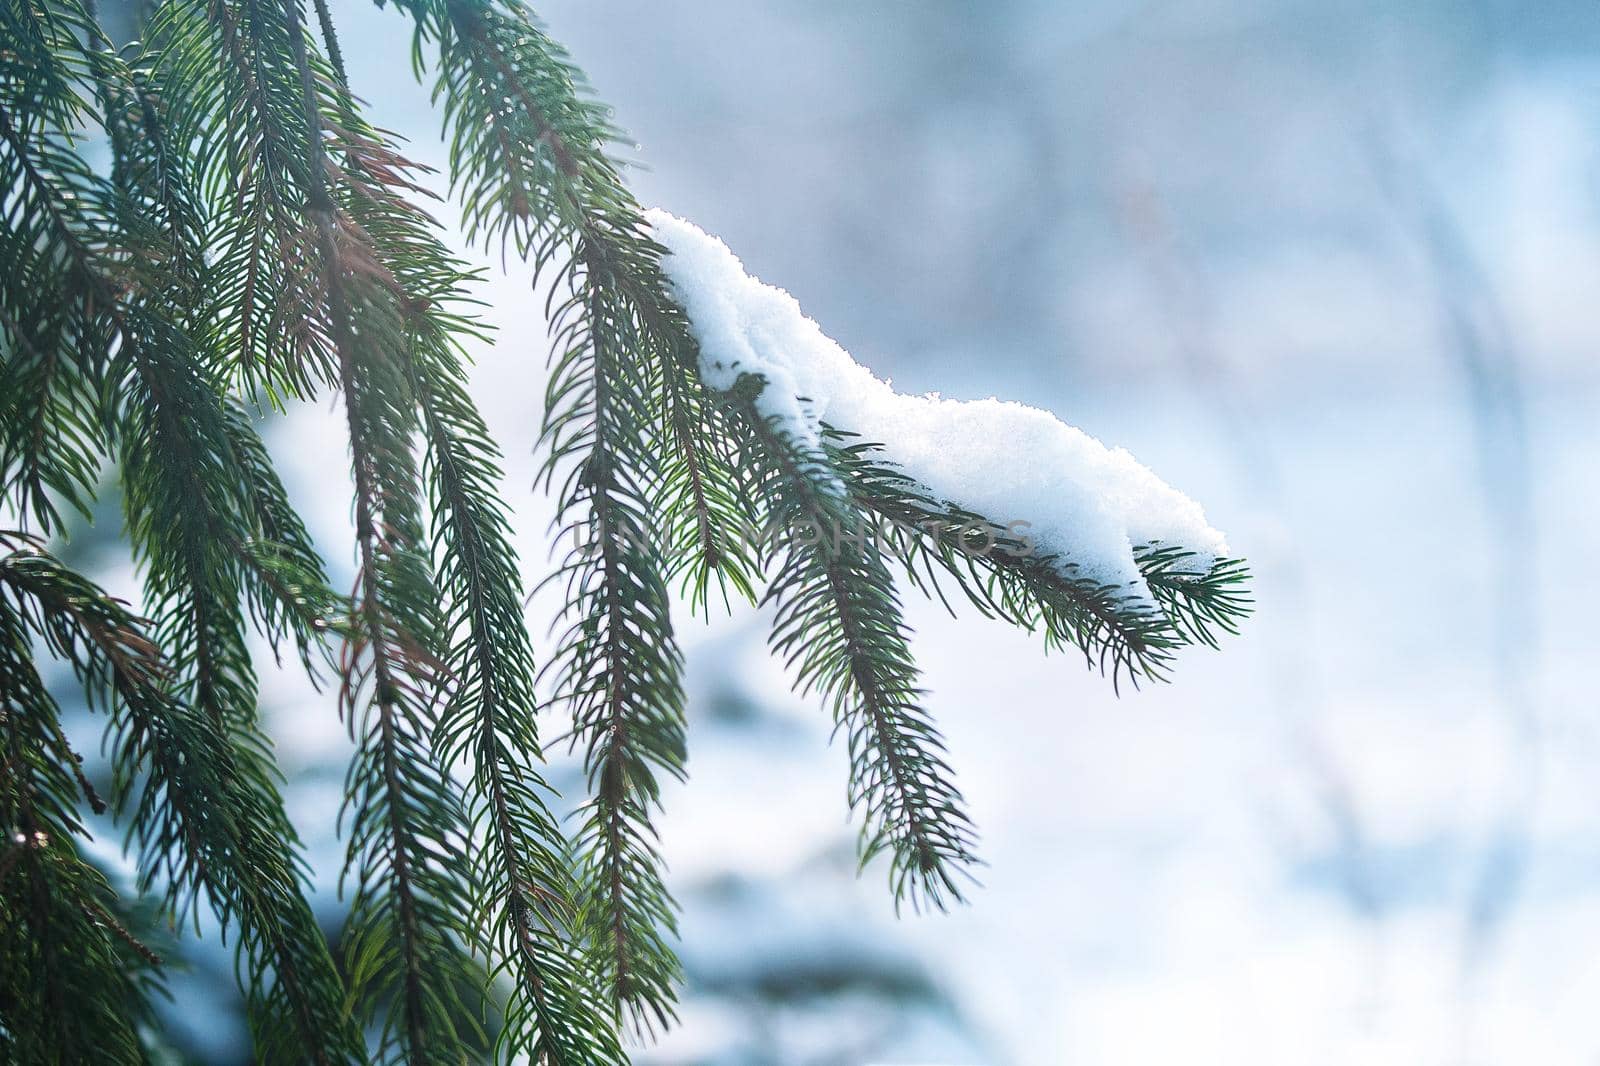 frost and snow on green needles of forest fir trees